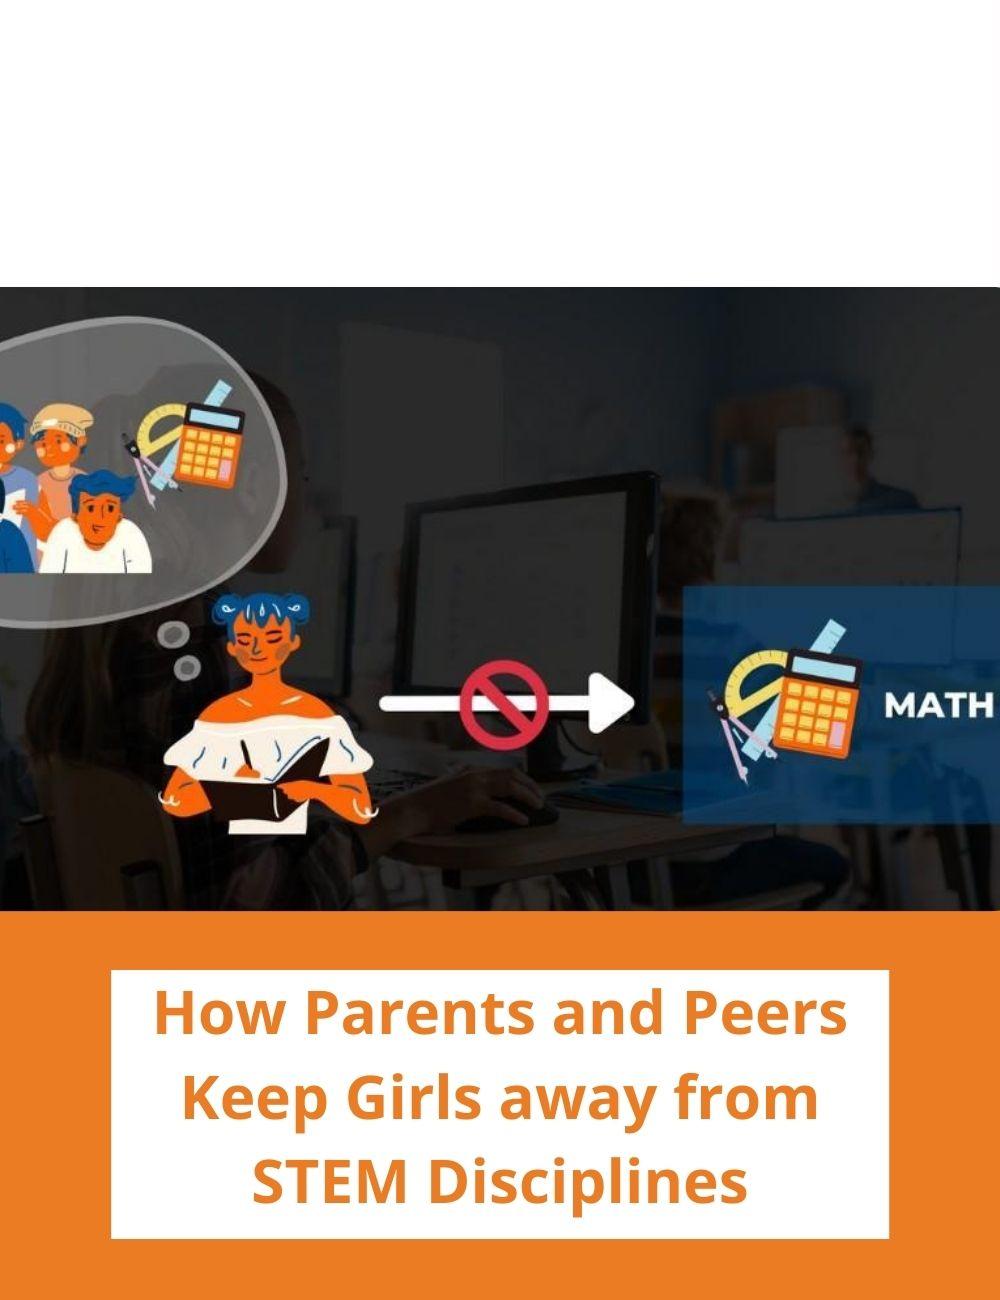 Image: a cartoon showing that influence from their families can deter girls from attending scientific studies. Link to related stories. Story headline: How Parents and Peers Keep Girls away from STEM Disciplines